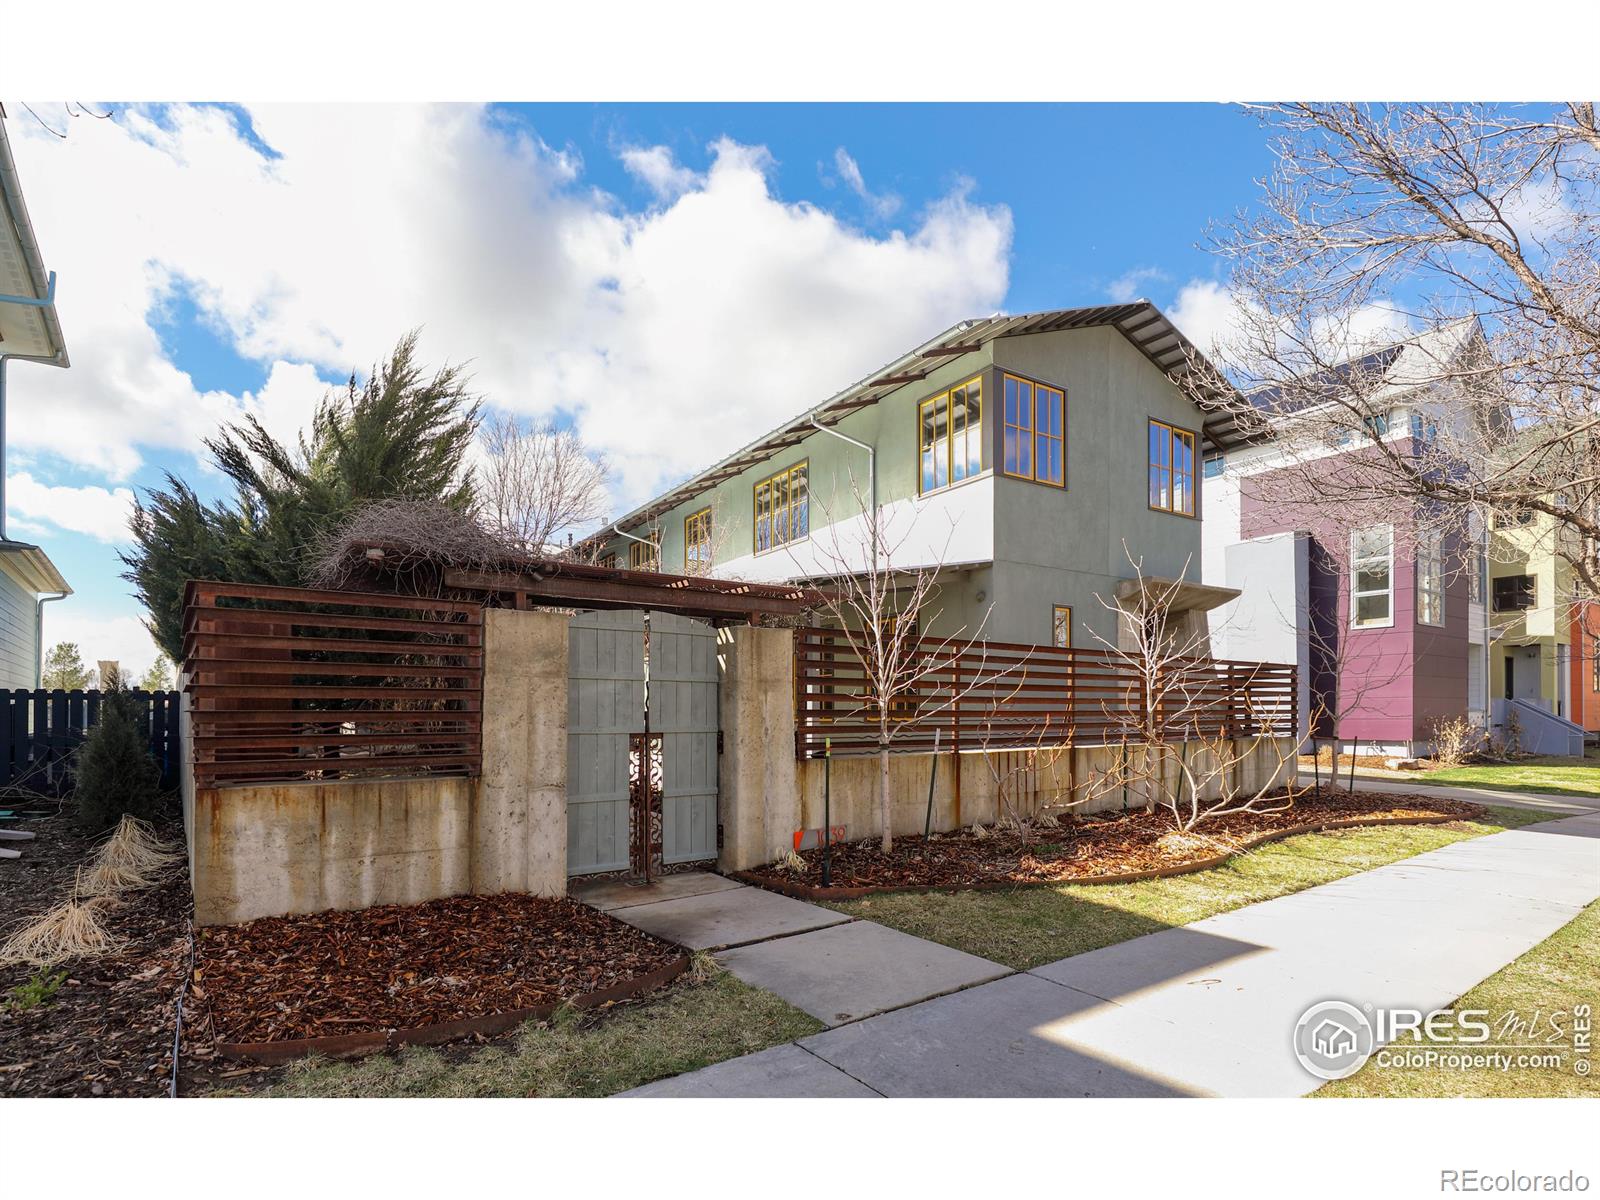 1039  Neon Forest Circle, longmont MLS: 4567891006699 Beds: 5 Baths: 5 Price: $1,650,000